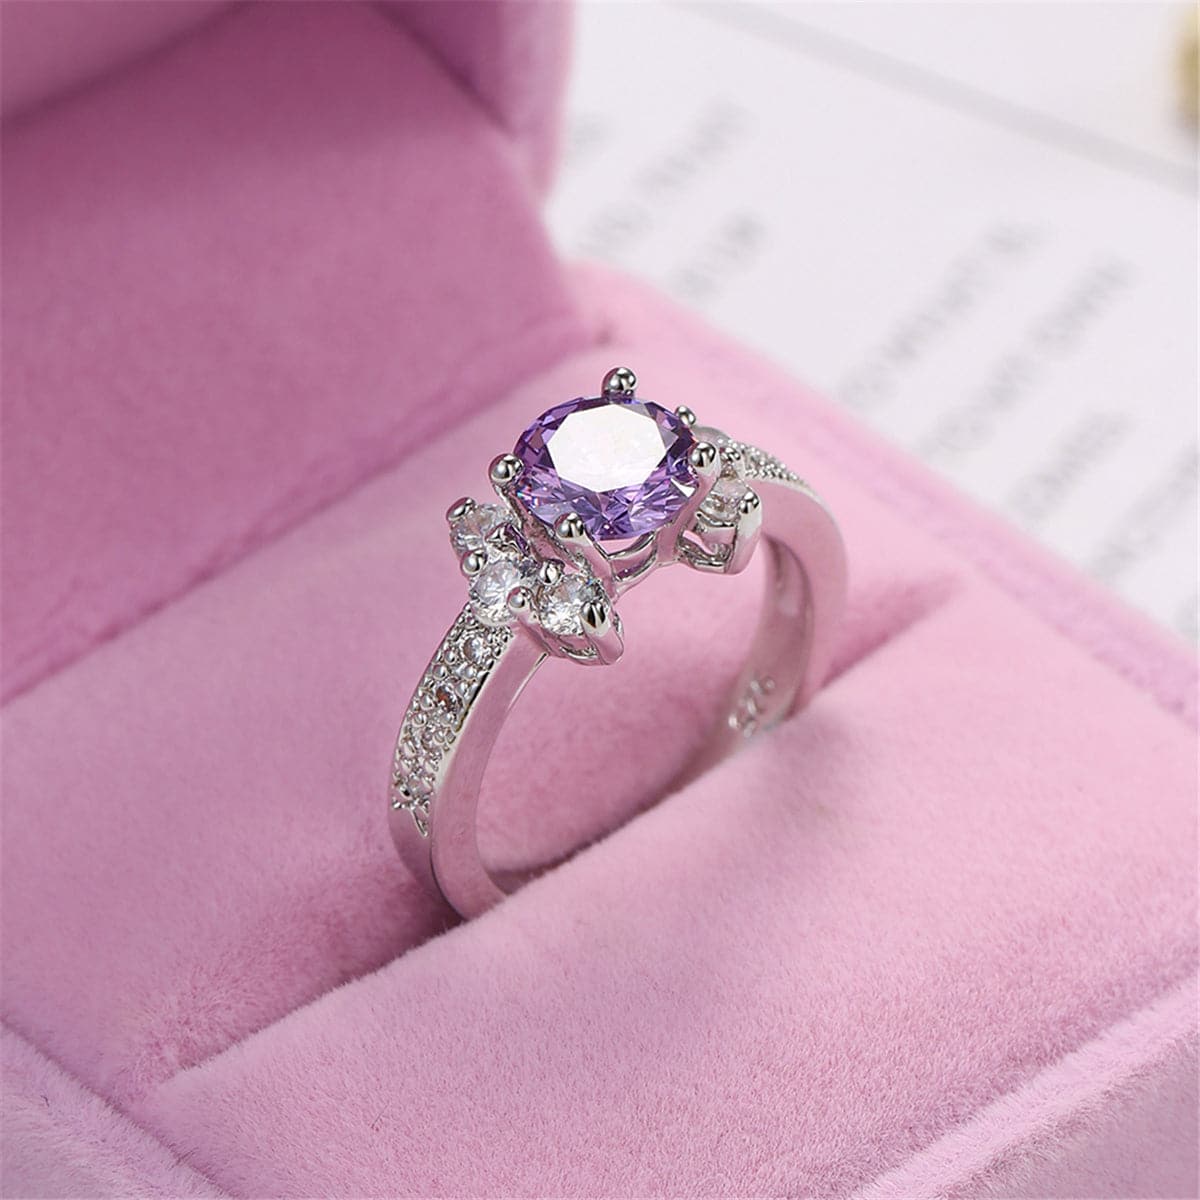 Purple Cubic Zirconia & Crystal Round Cluster-Side Ring